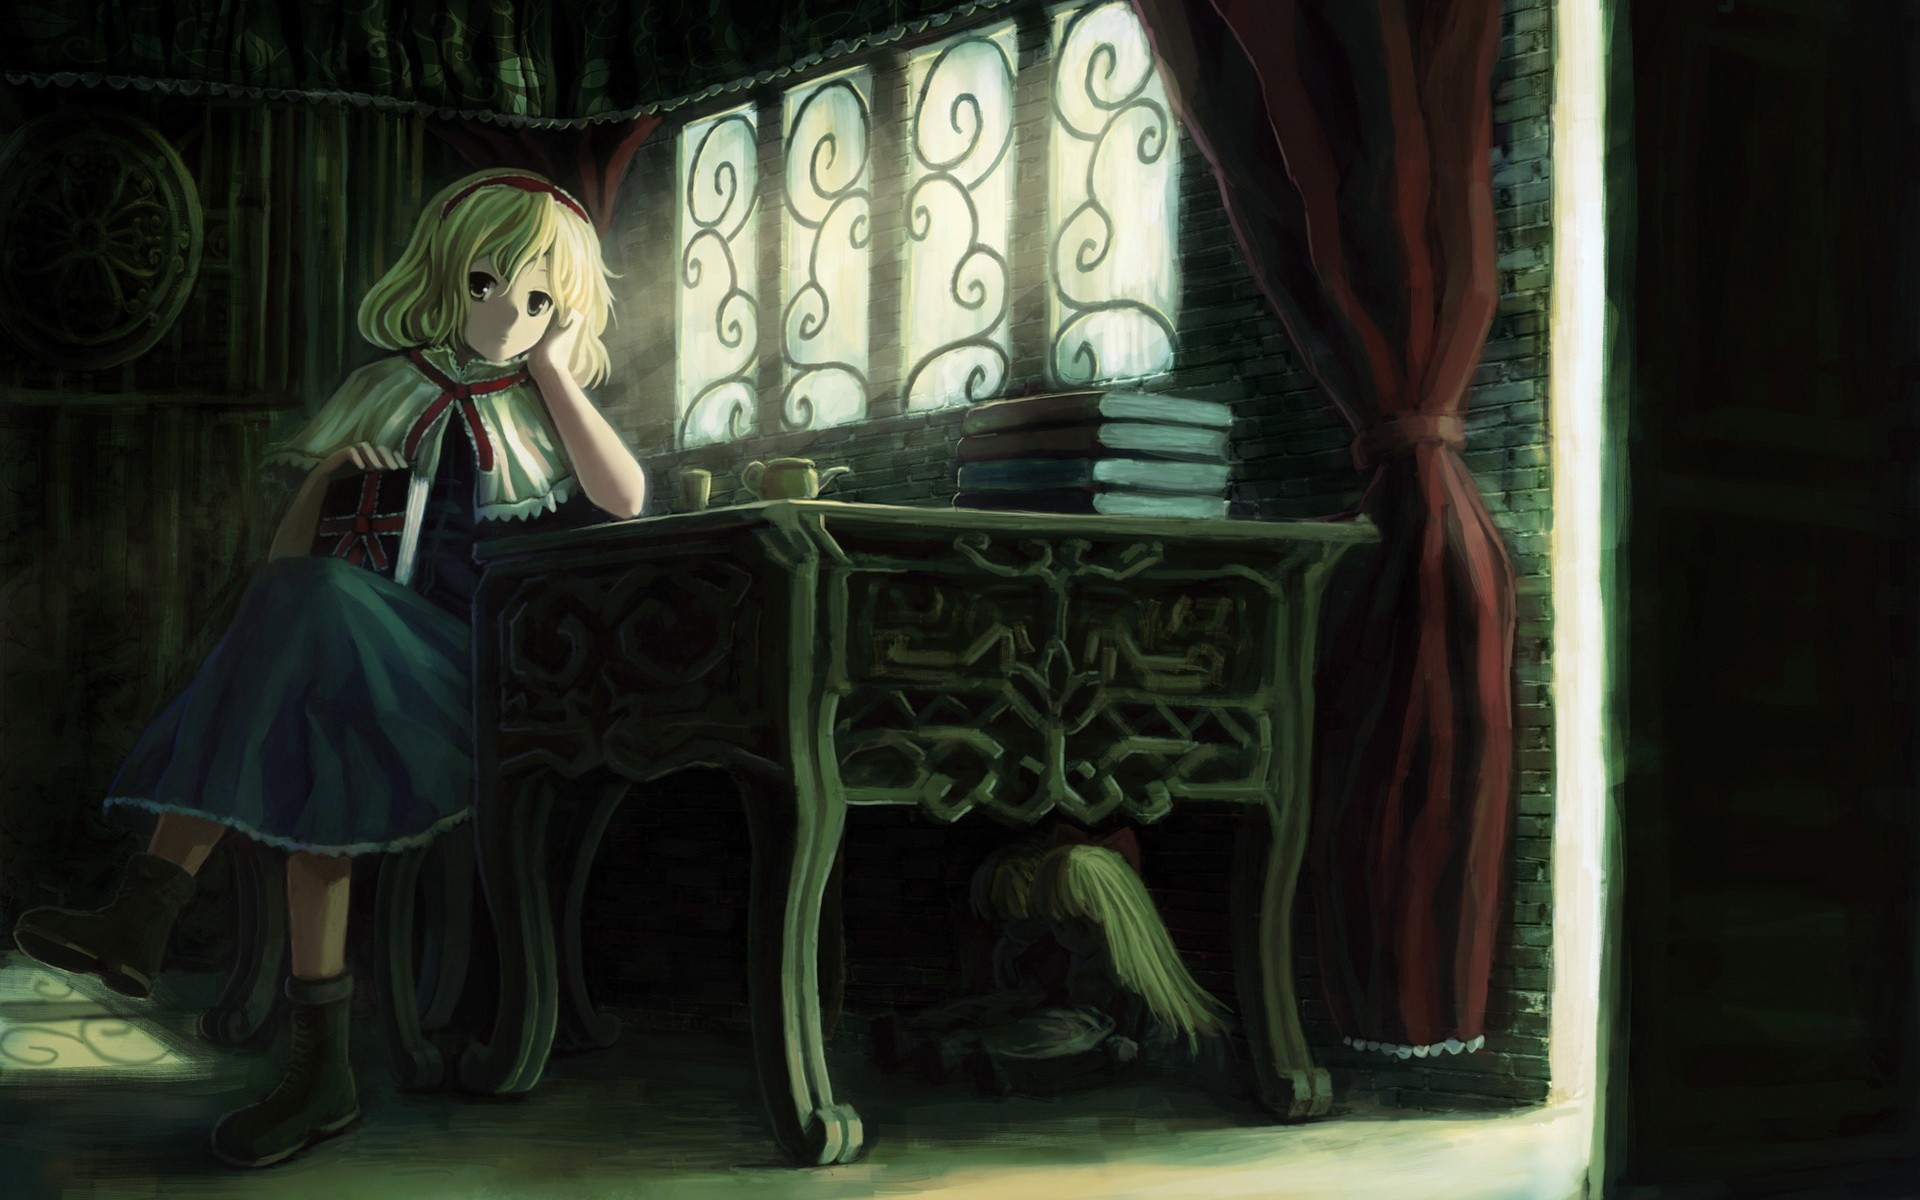 blondes, video games, Touhou, dress, indoors, room, long hair, ribbons, tables, books, short hair, yellow eyes, sunlight, chairs, sitting, curtains, dolls, window panes, Alice Margatroid, hair band, witches - desktop wallpaper